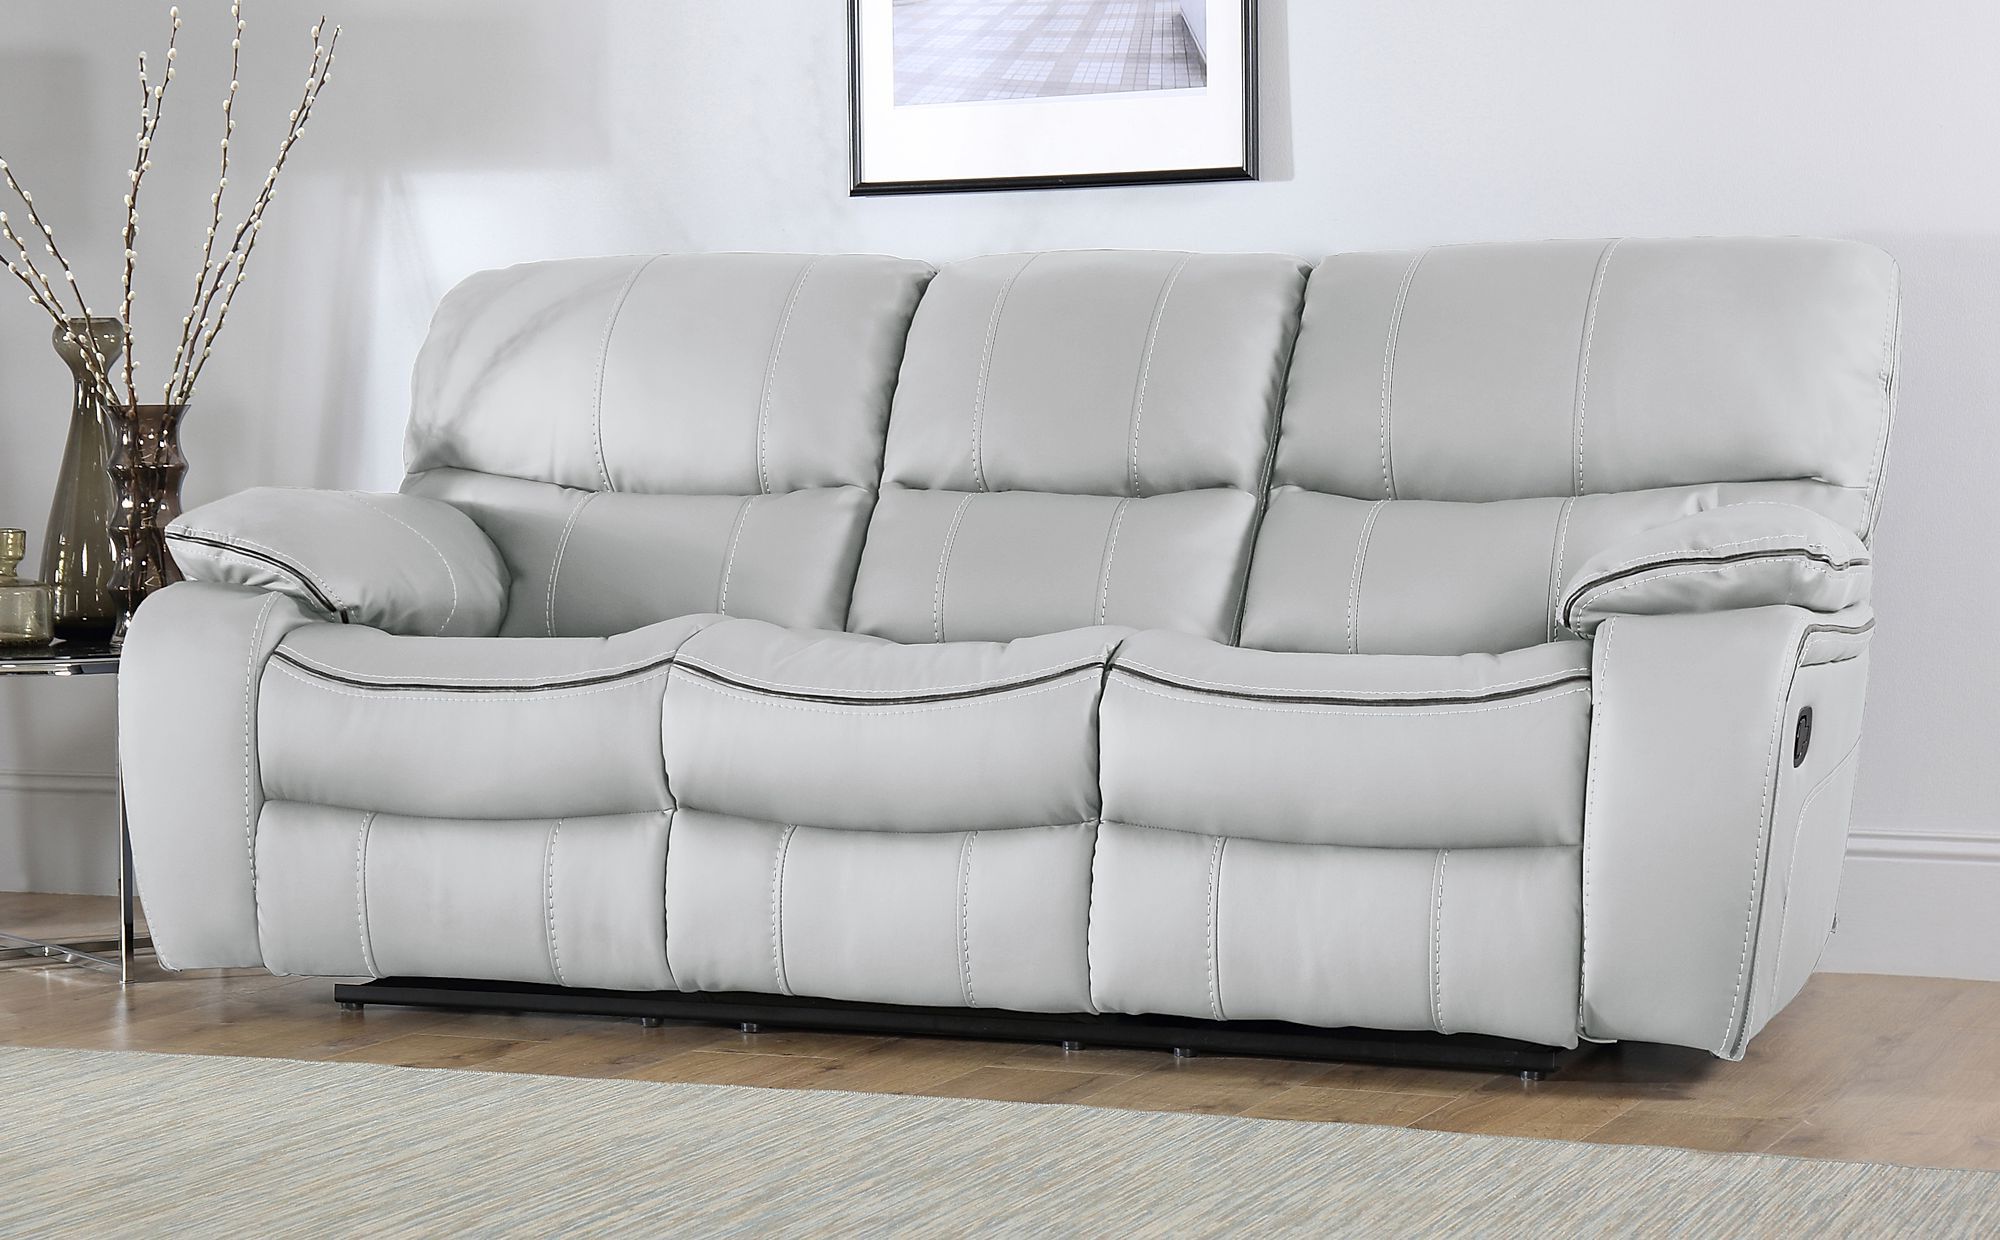 Popular Sofas In Light Grey Regarding Beaumont Light Grey Leather 3 Seater Recliner Sofa (View 15 of 15)